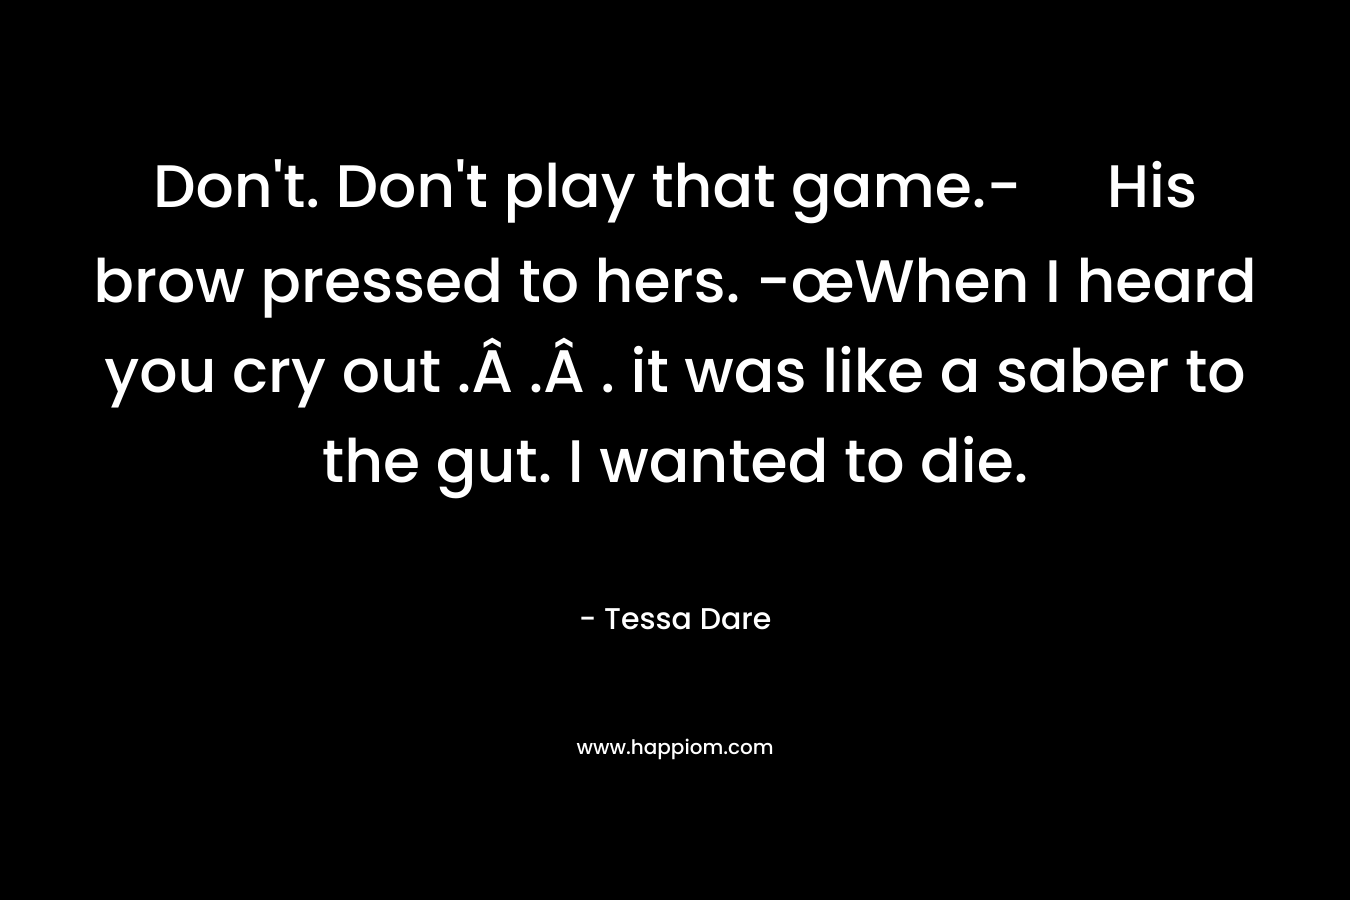 Don’t. Don’t play that game.- His brow pressed to hers. -œWhen I heard you cry out .Â .Â . it was like a saber to the gut. I wanted to die. – Tessa Dare